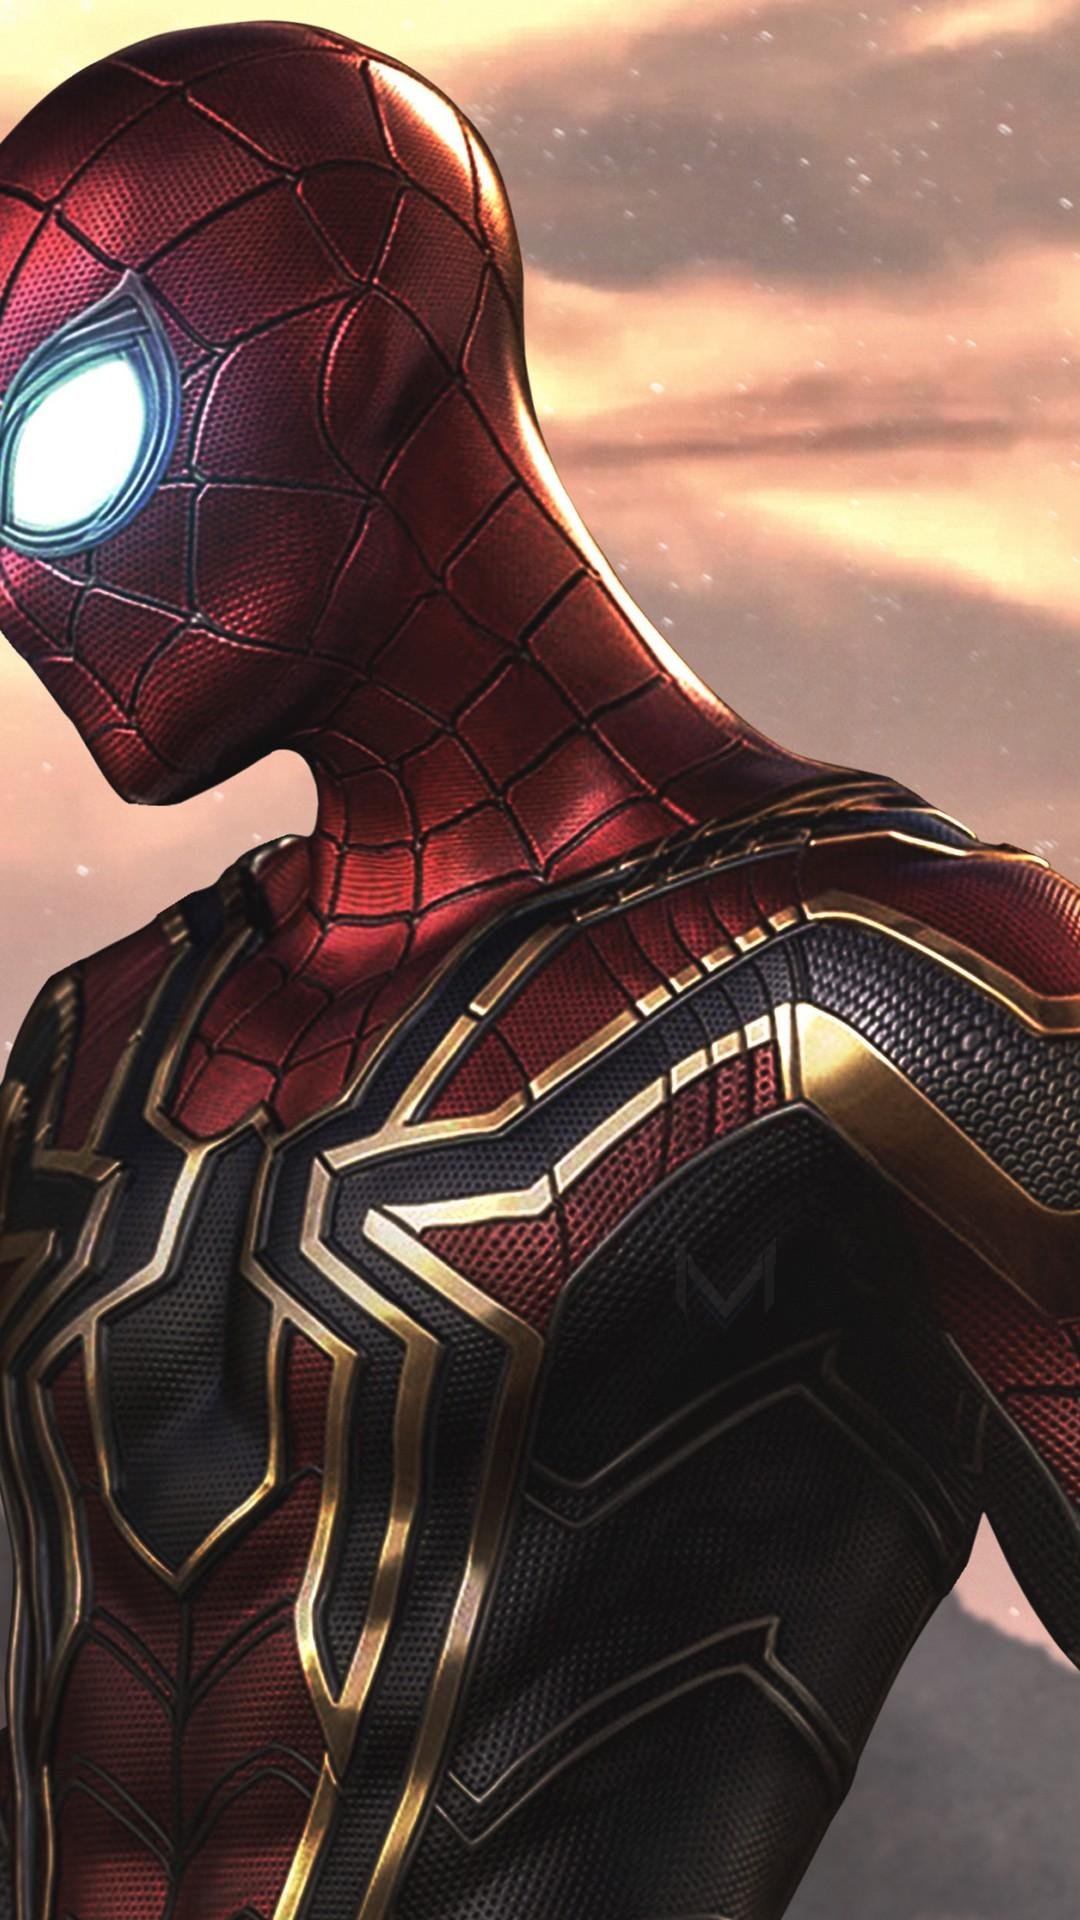 100+] Iron Spider Wallpapers | Wallpapers.com